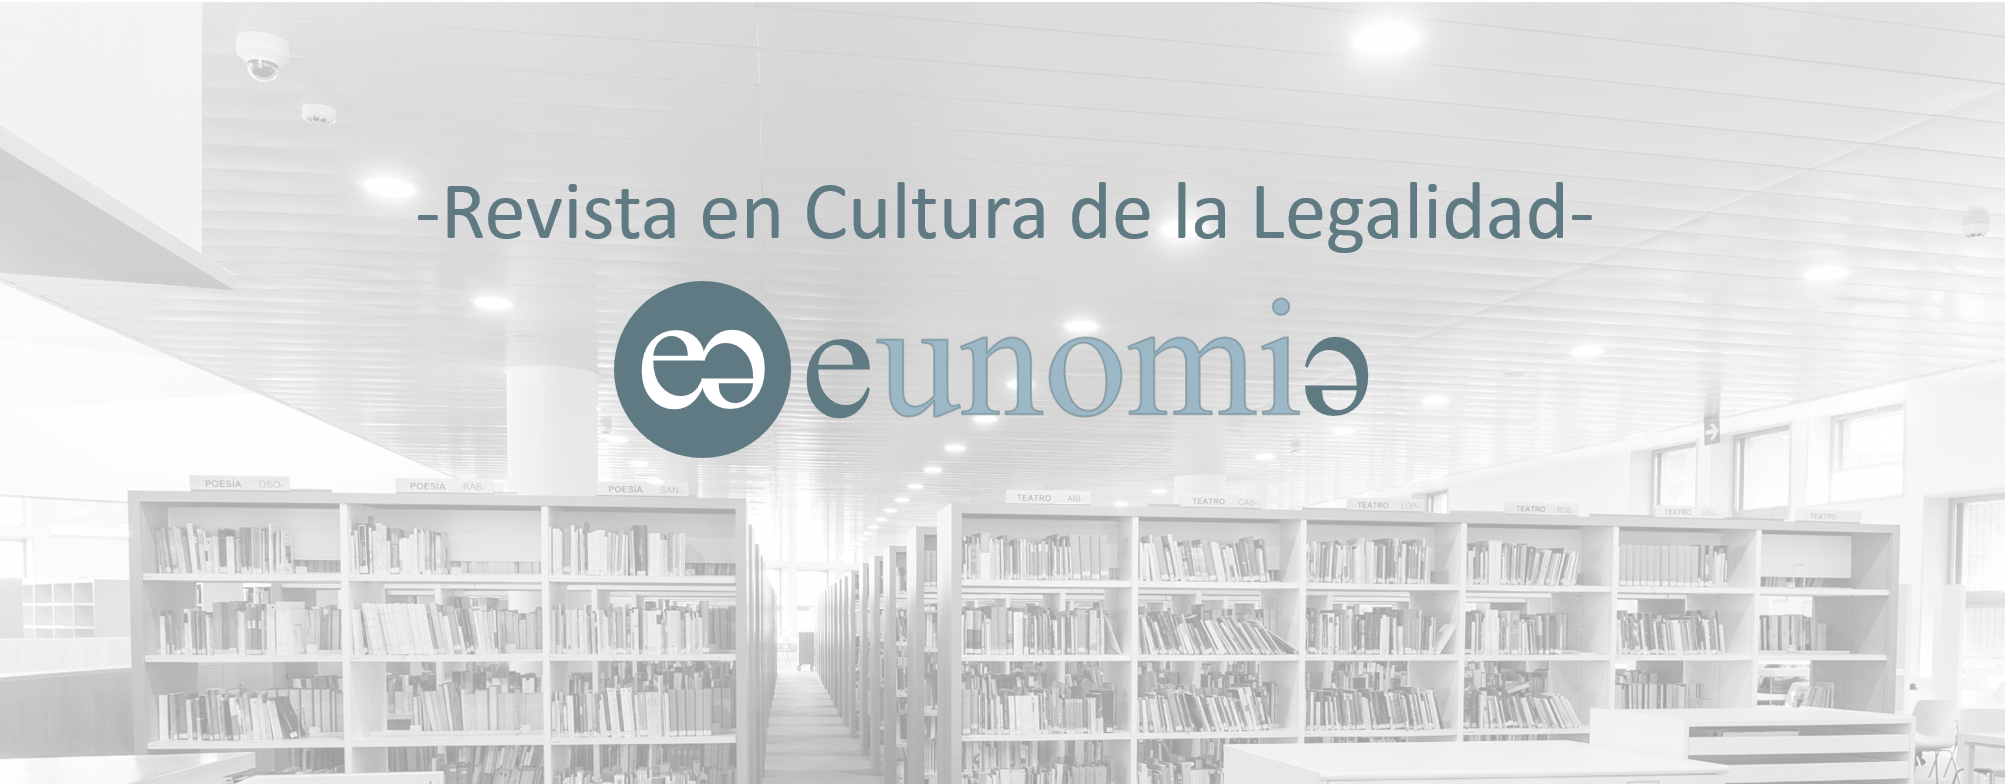 24th Issue of Eunomía. Journal on Culture of Lawfulness